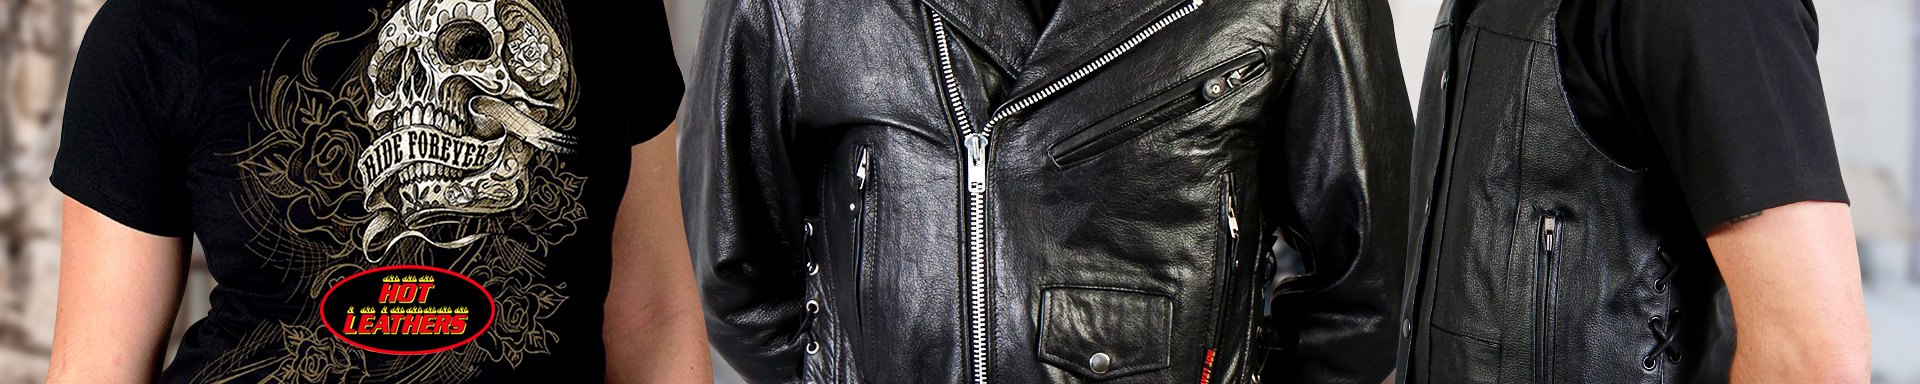 Hot Leathers Vests